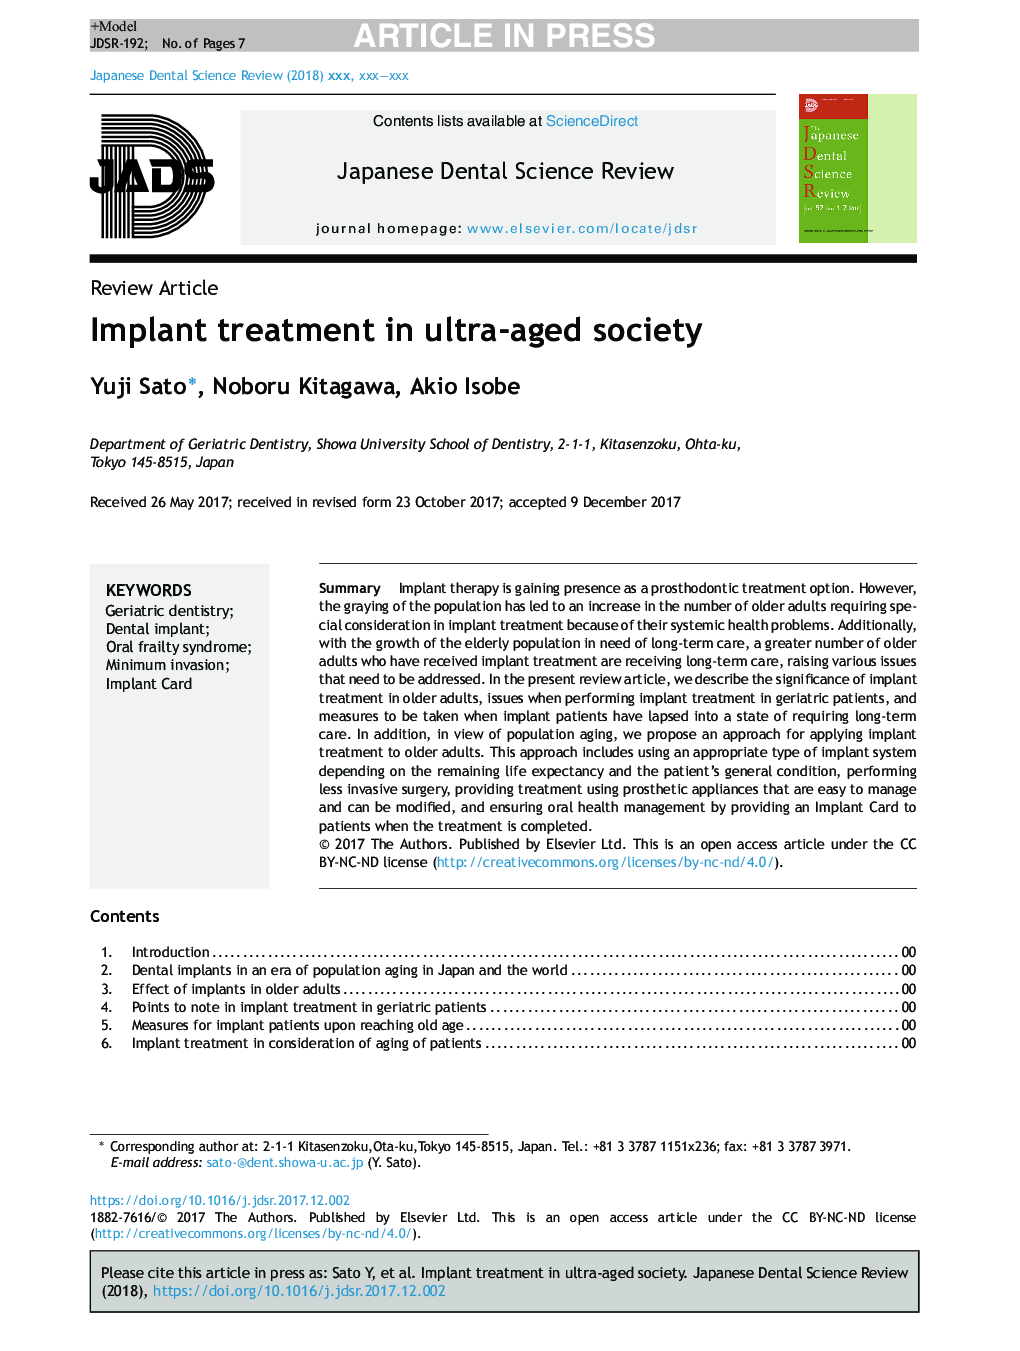 Implant treatment in ultra-aged society